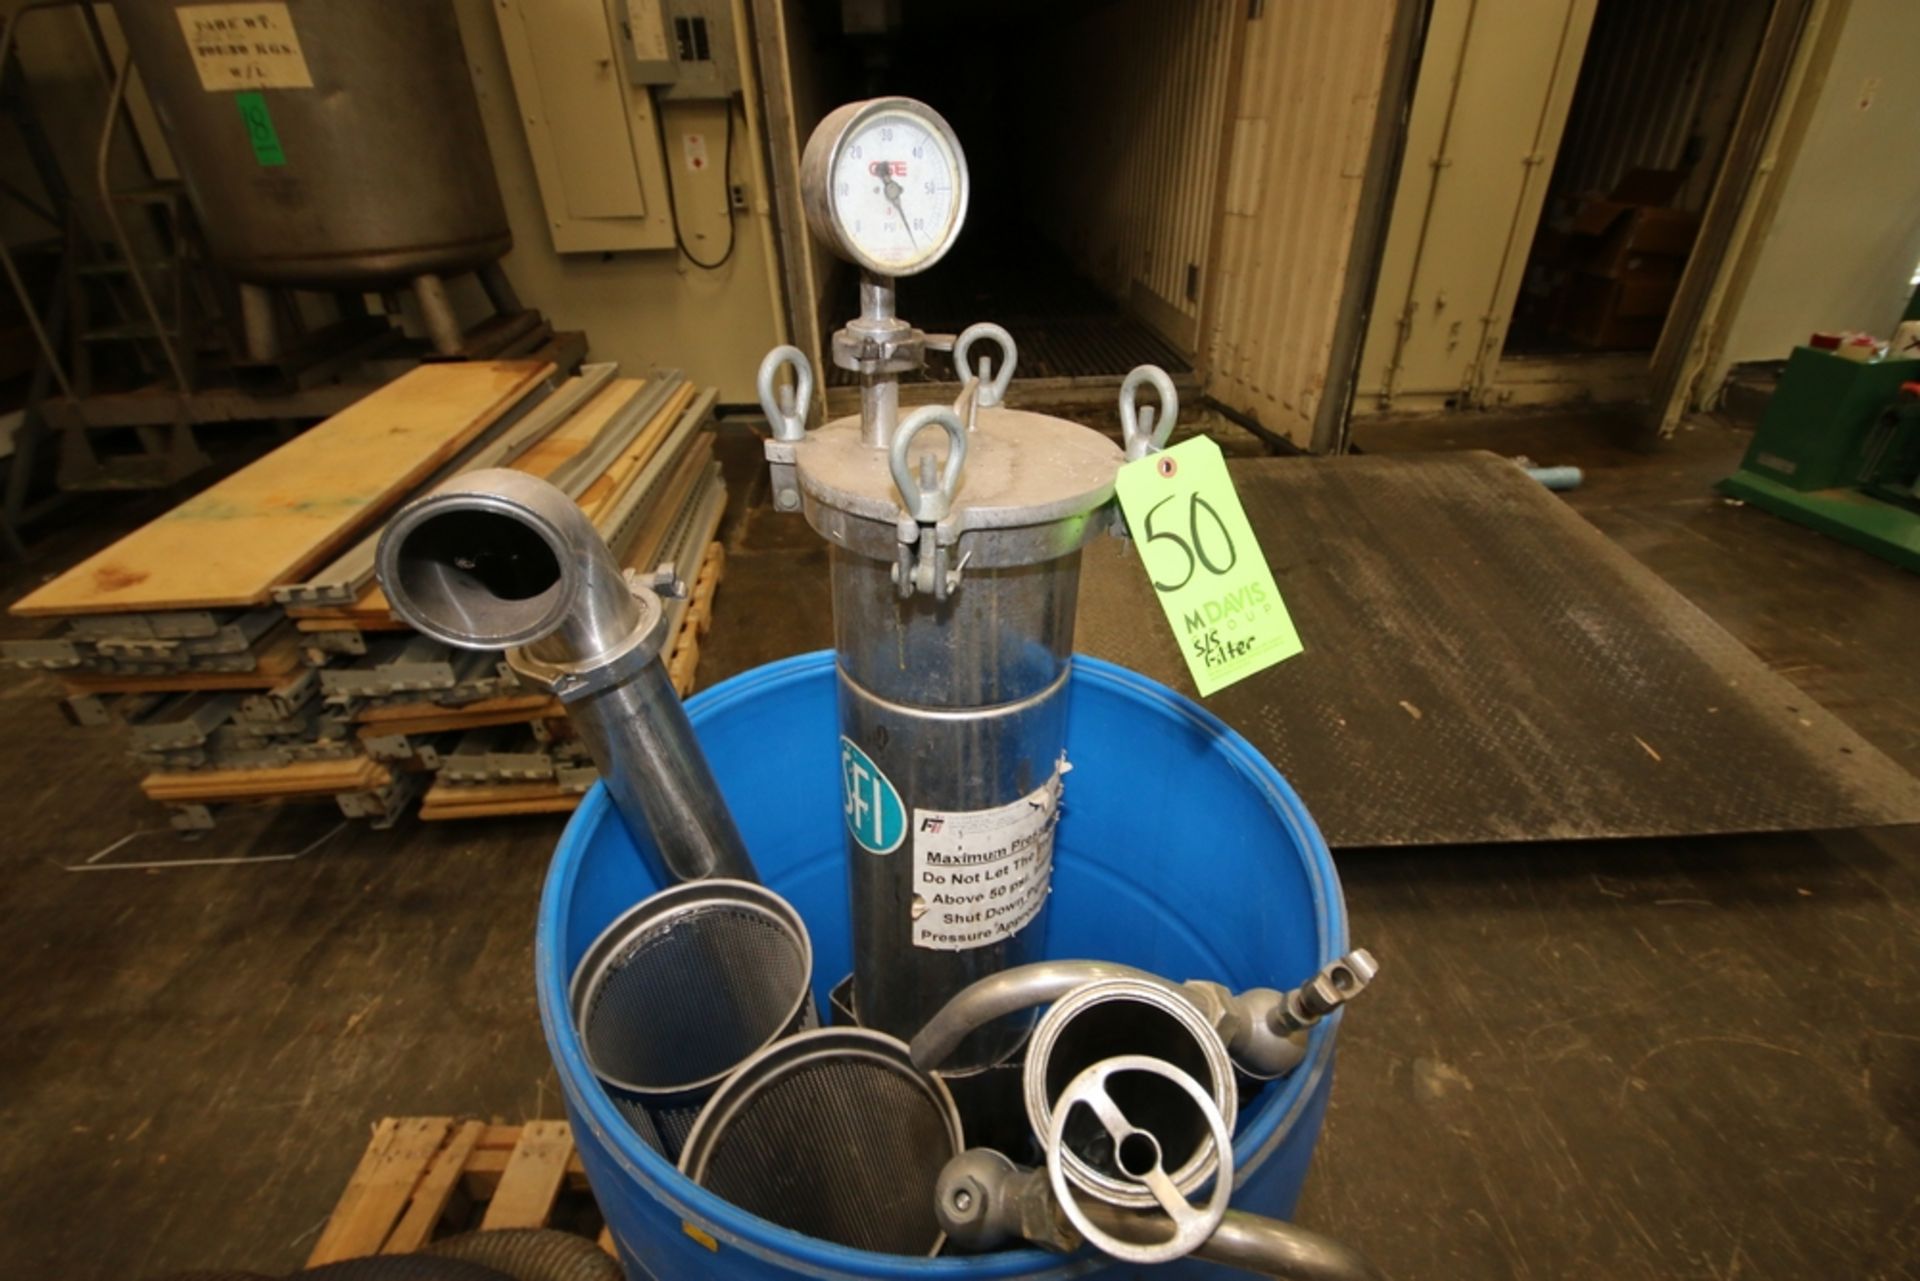 SFI S/S Filter, S/N 4387, with Accessories, with Assorted S/S Parts & Transfer Hose - Image 2 of 3